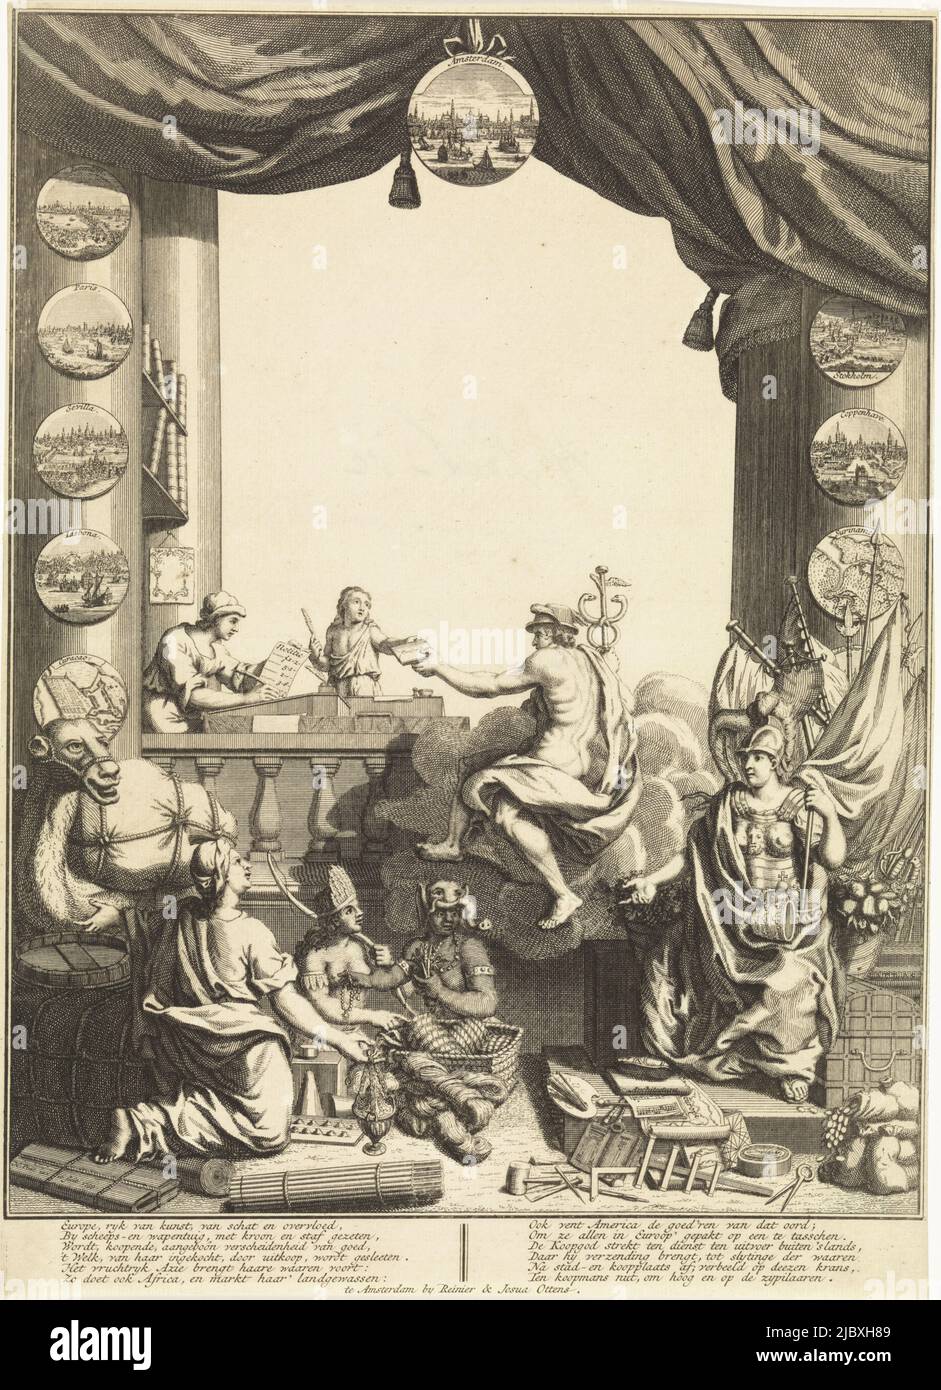 Mercury, in a cloud, gives an envelope to a boy, who is helping a man with his administration. In the foreground a packed camel and personifications of America, Africa, Asia and Europe. On the ground, objects related to trade, shipping and justice. On the columns on both sides are depictions of Suriname and several important European cities, with Amsterdam at the center. At the bottom of the print a poem praising Europe's trade with the rest of the world, Allegorical depiction of Mercury with personifications of Africa, America, Asia and Europe, print maker: Hendrik Post, (mentioned on object Stock Photo